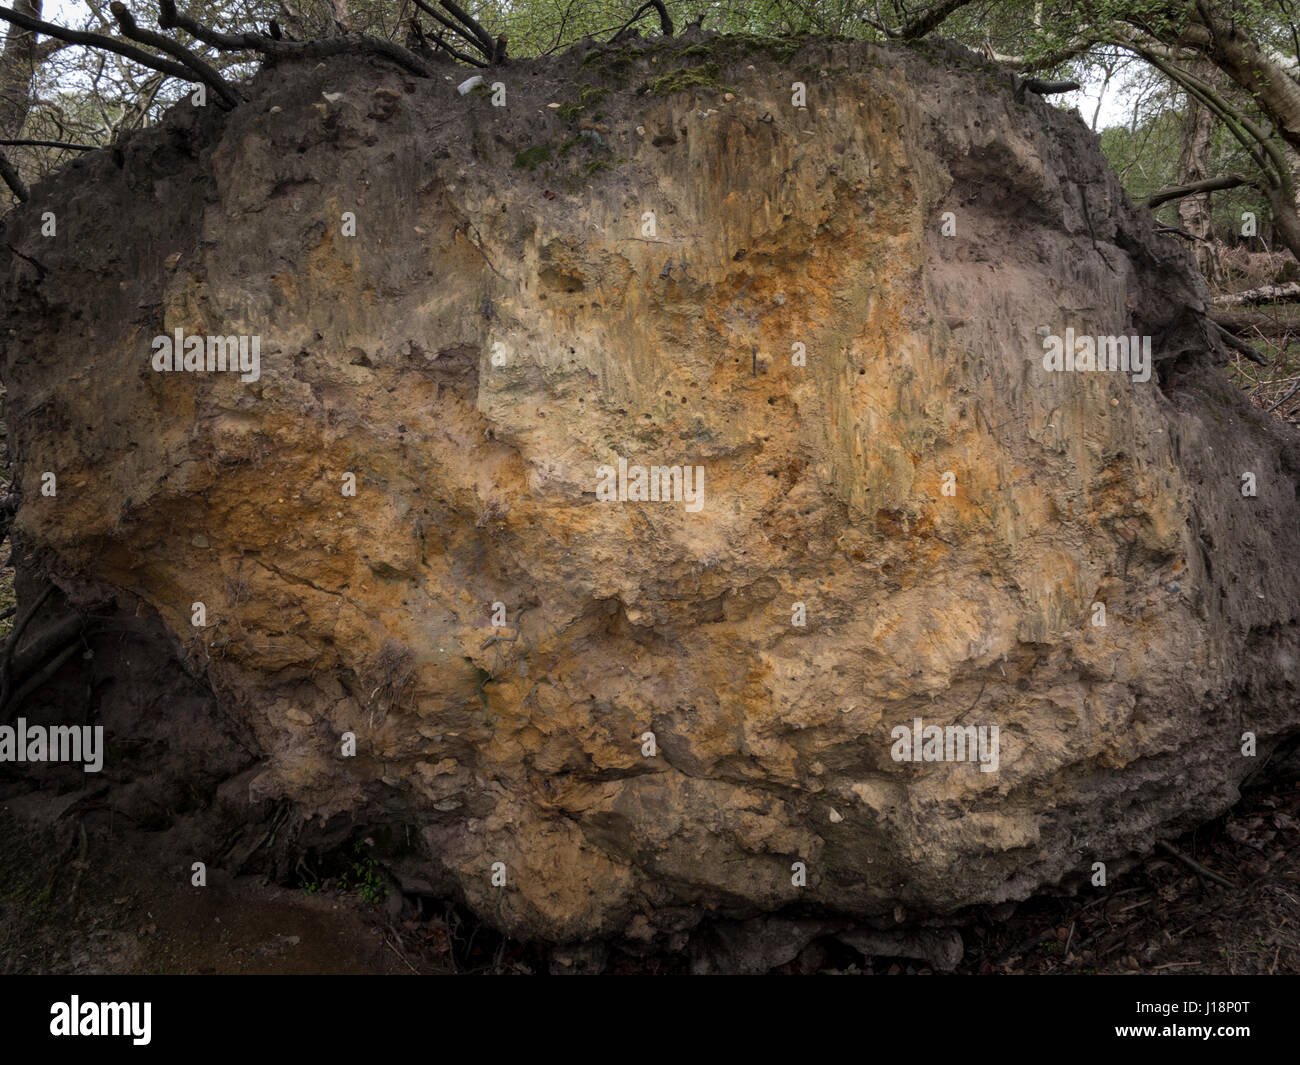 The base of an uprooted tree with soil clinging heavily to it Stock Photo